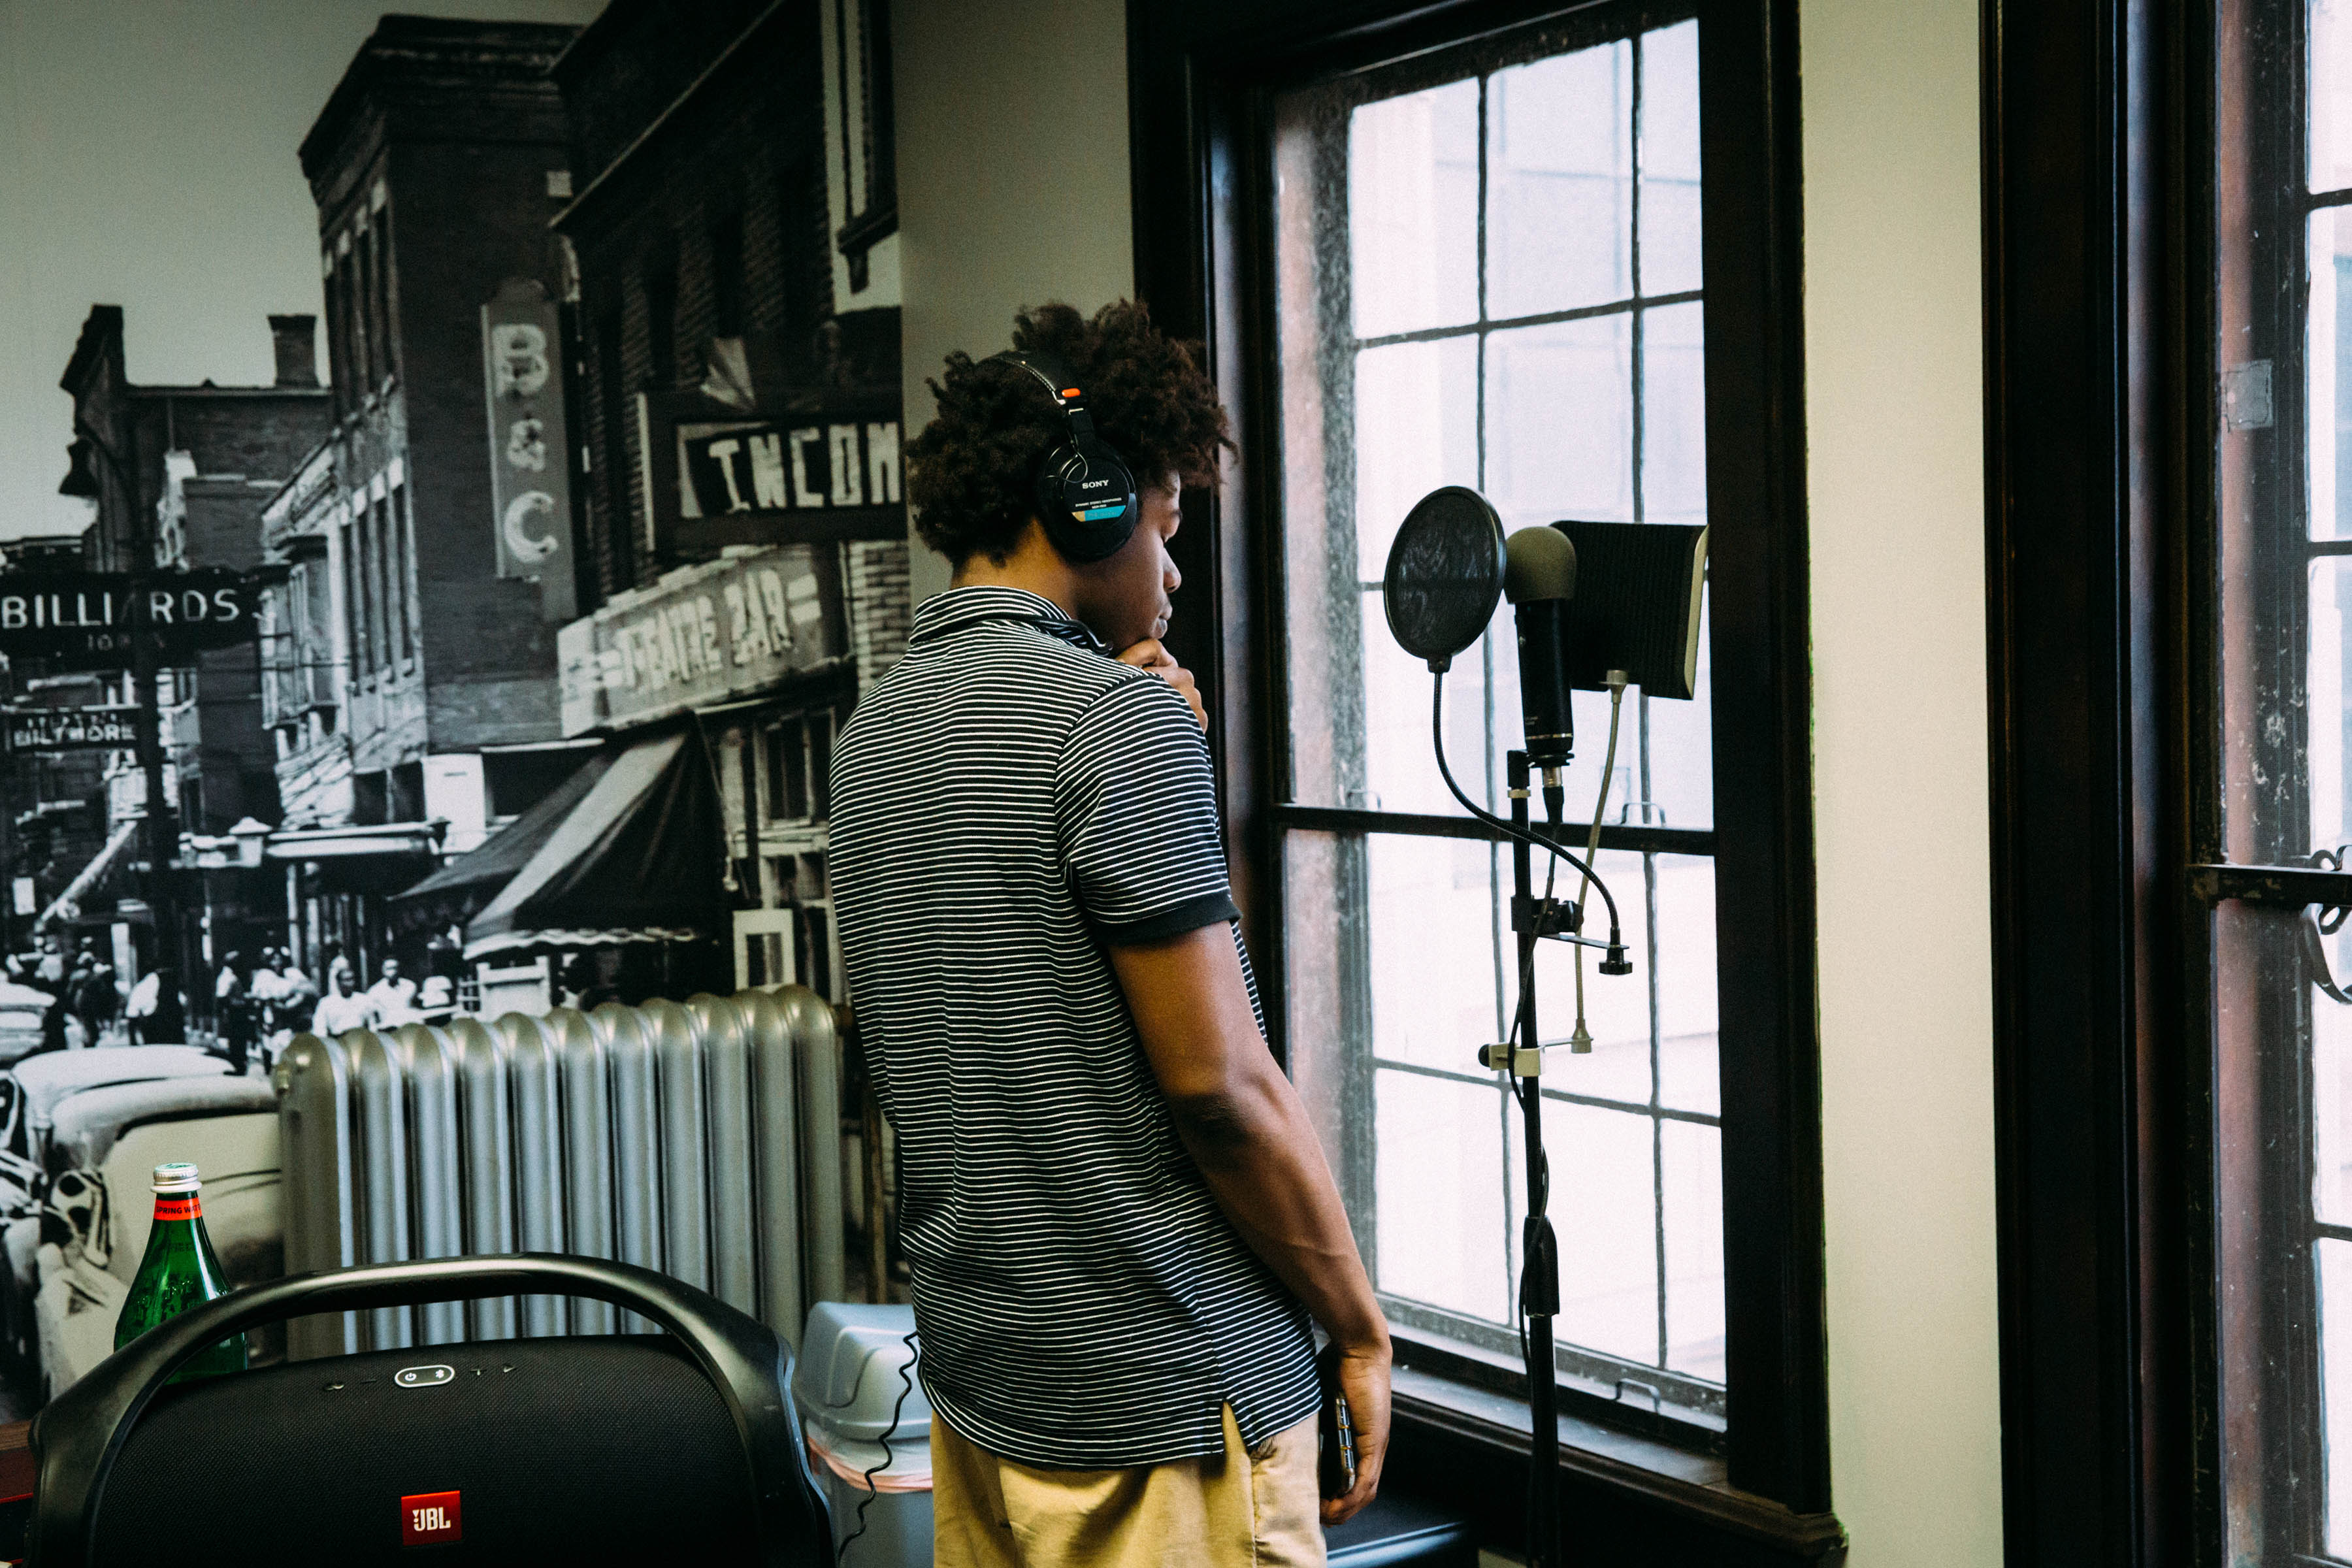 A student stands pensively, preparing to record his song in the pop-up studio at the Marygrove campus.